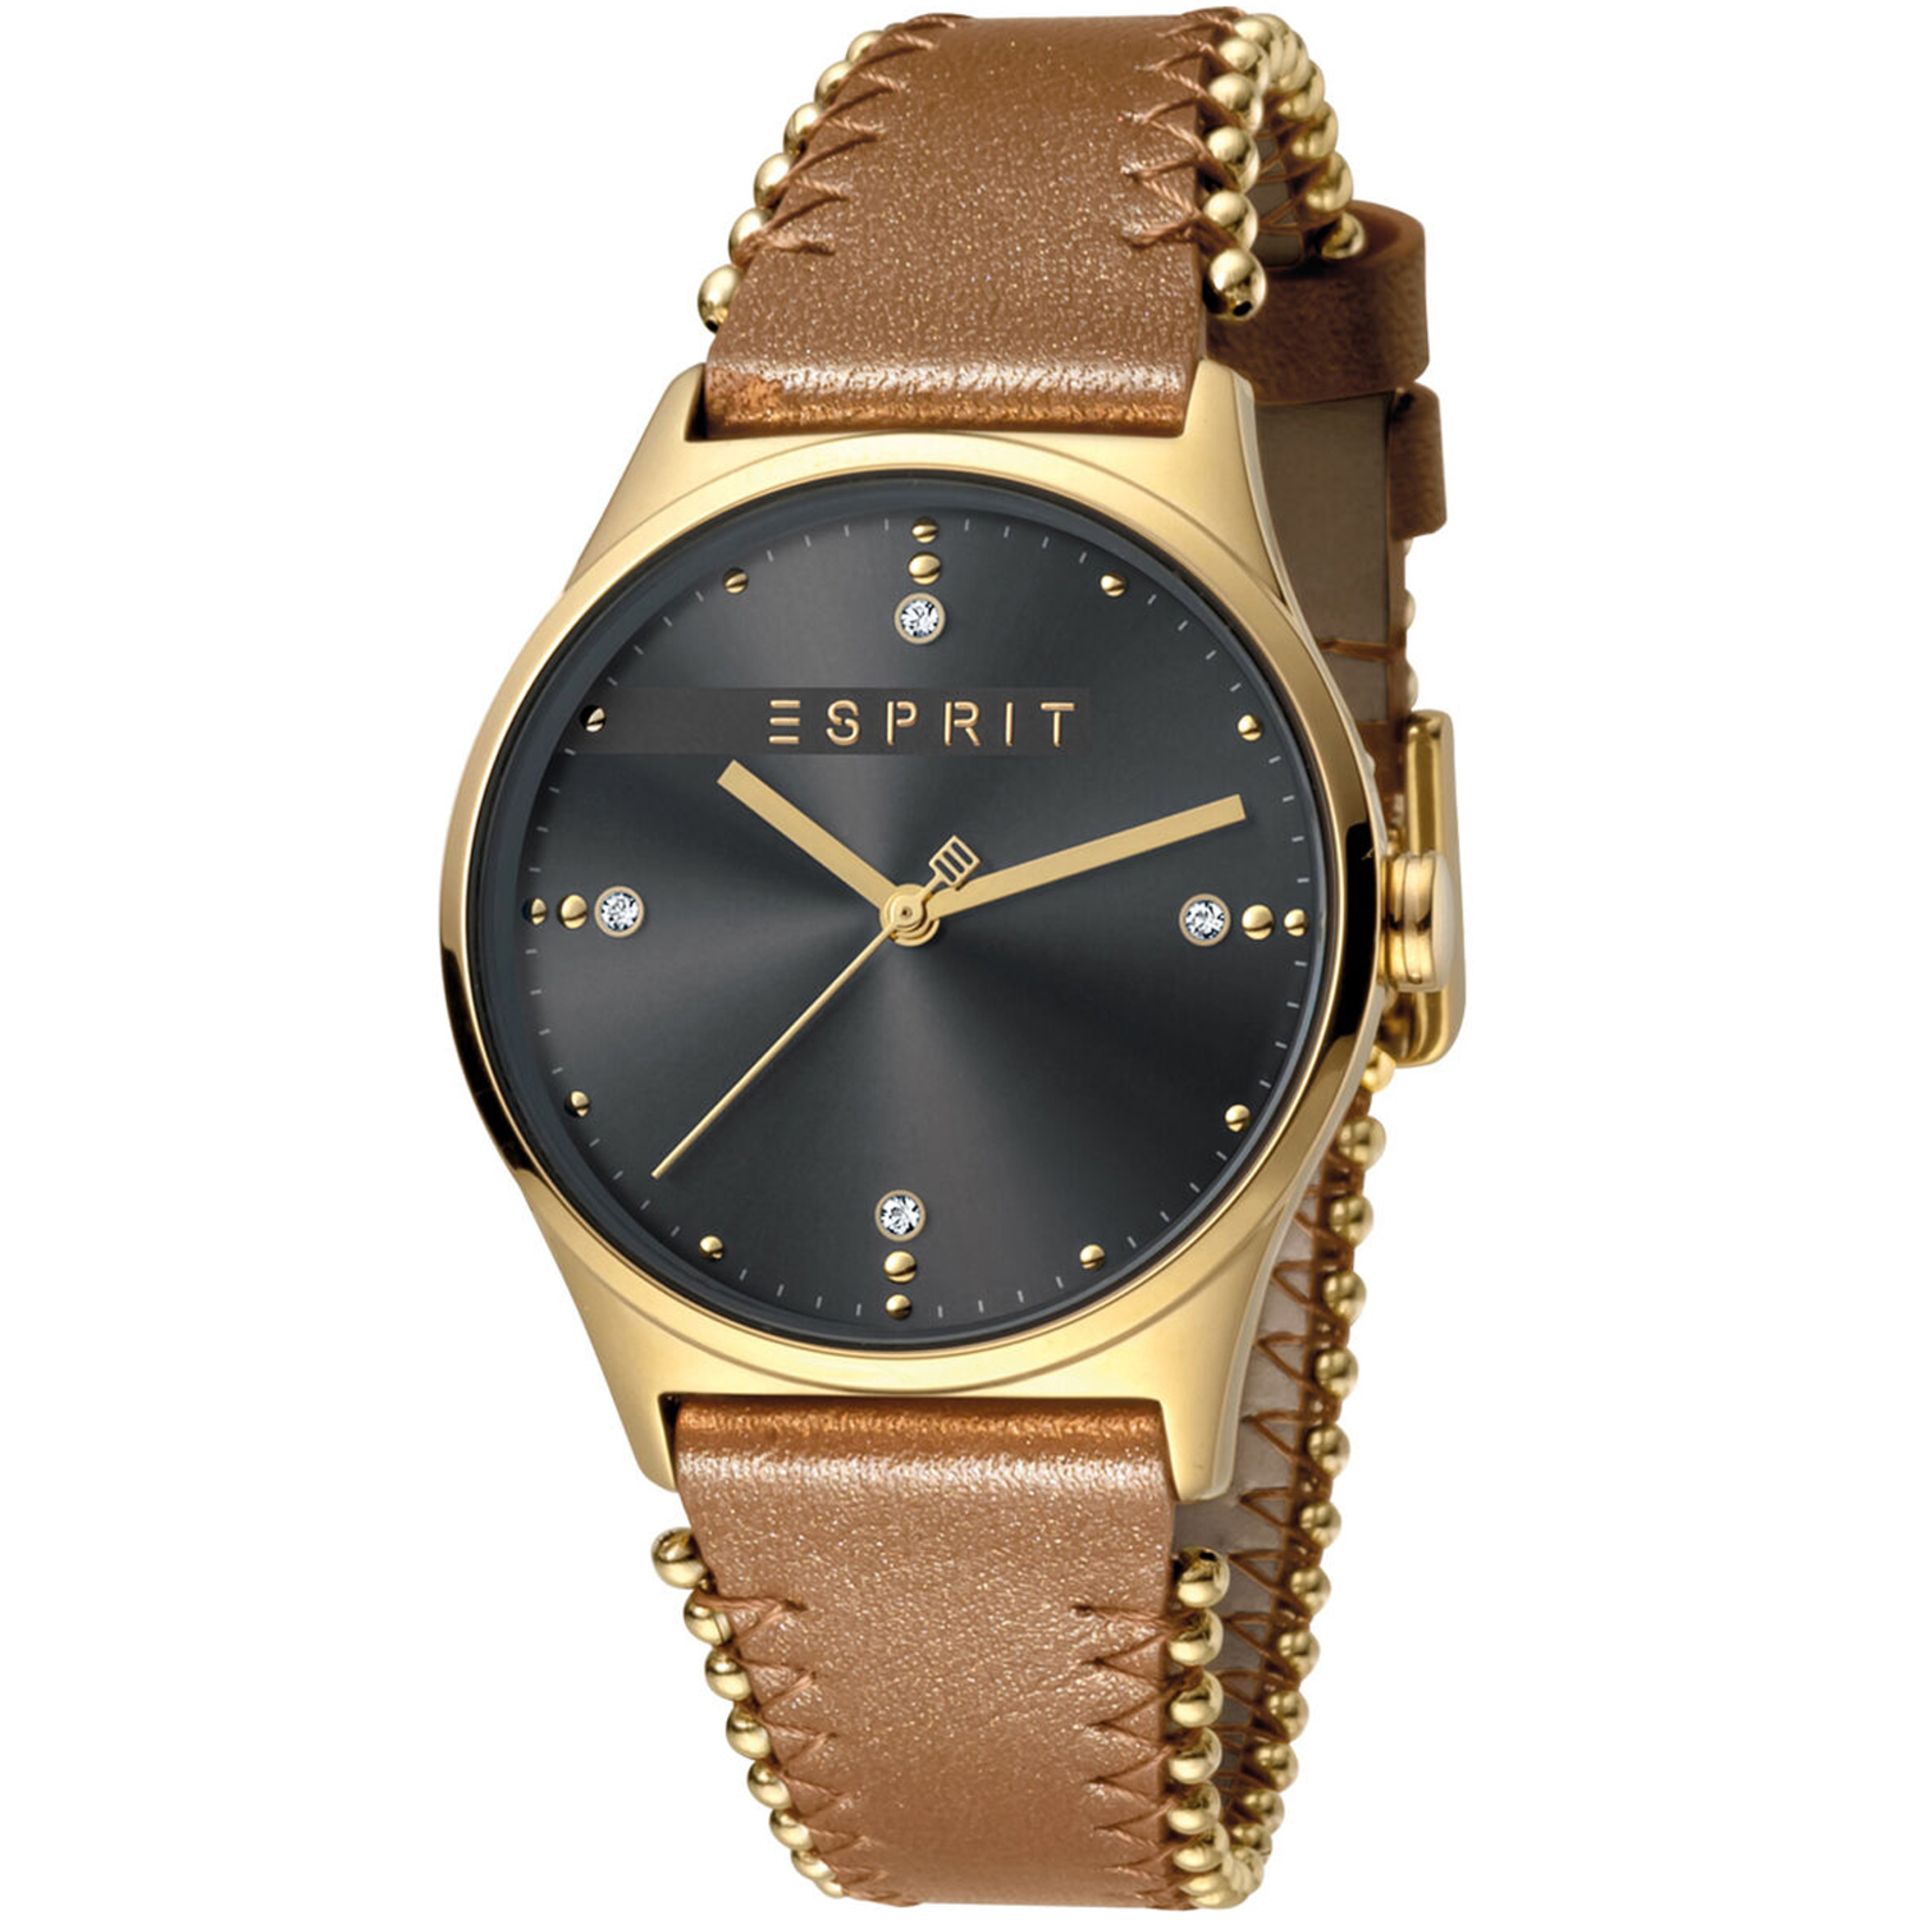 No VAT Brand New Espirt Ladies Watch ES1L032L0035 - Real Leather Strap - Gold Plated Casing - 30m